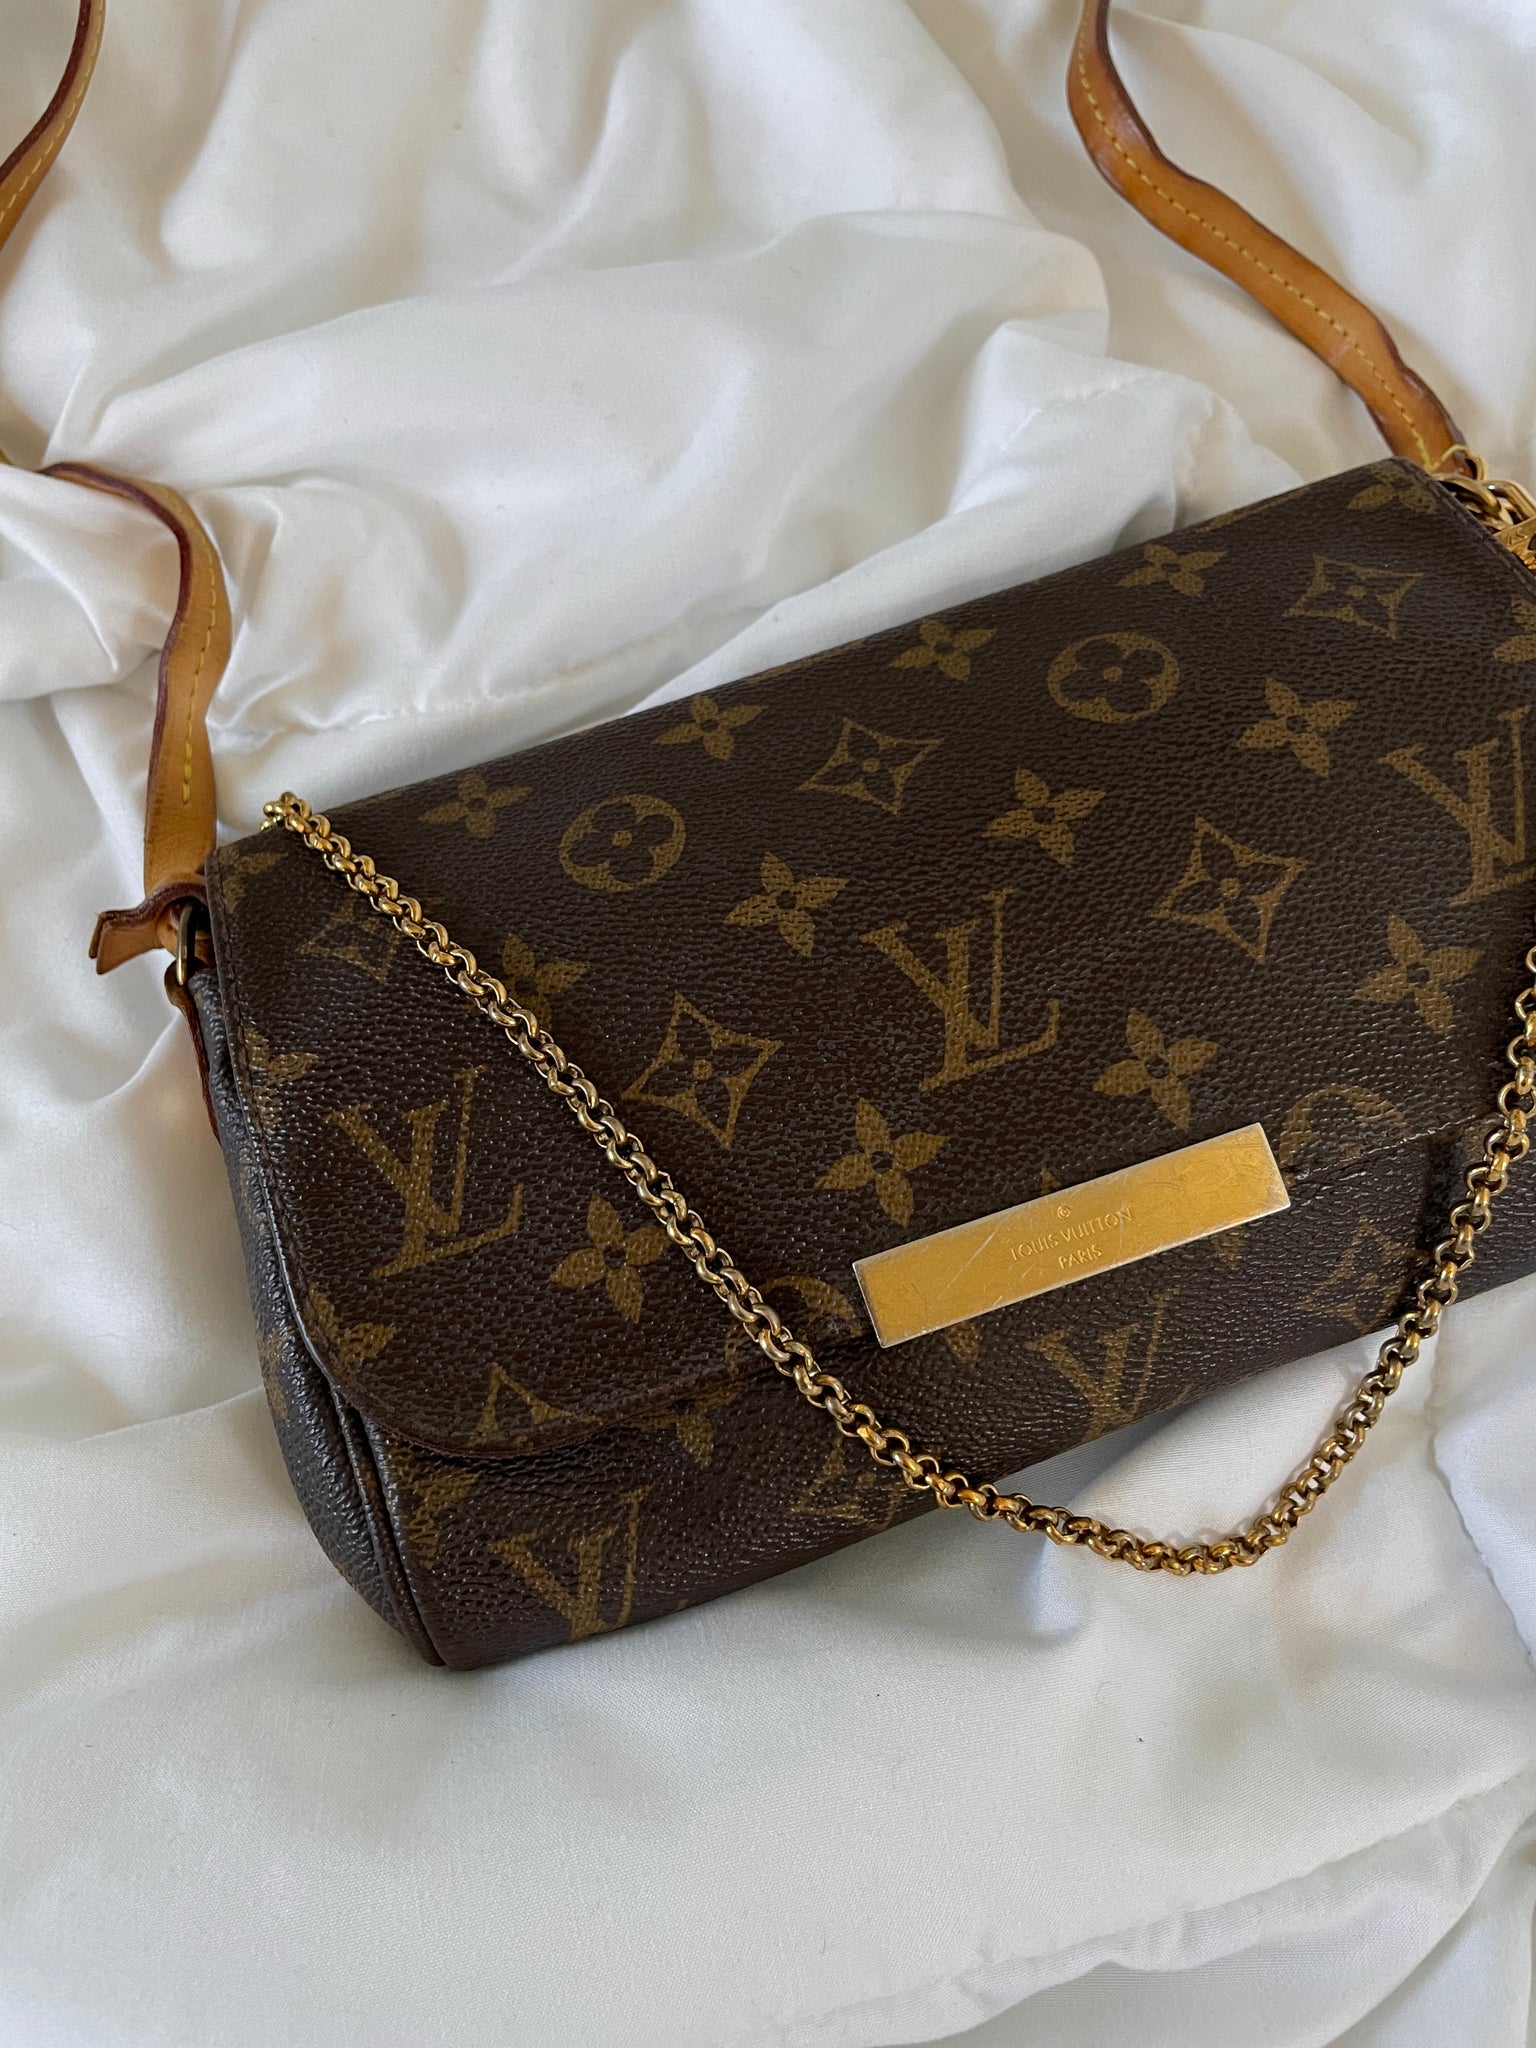 Louis Vuitton FAVORITE PM M40717 NEW Authentic bought in LV